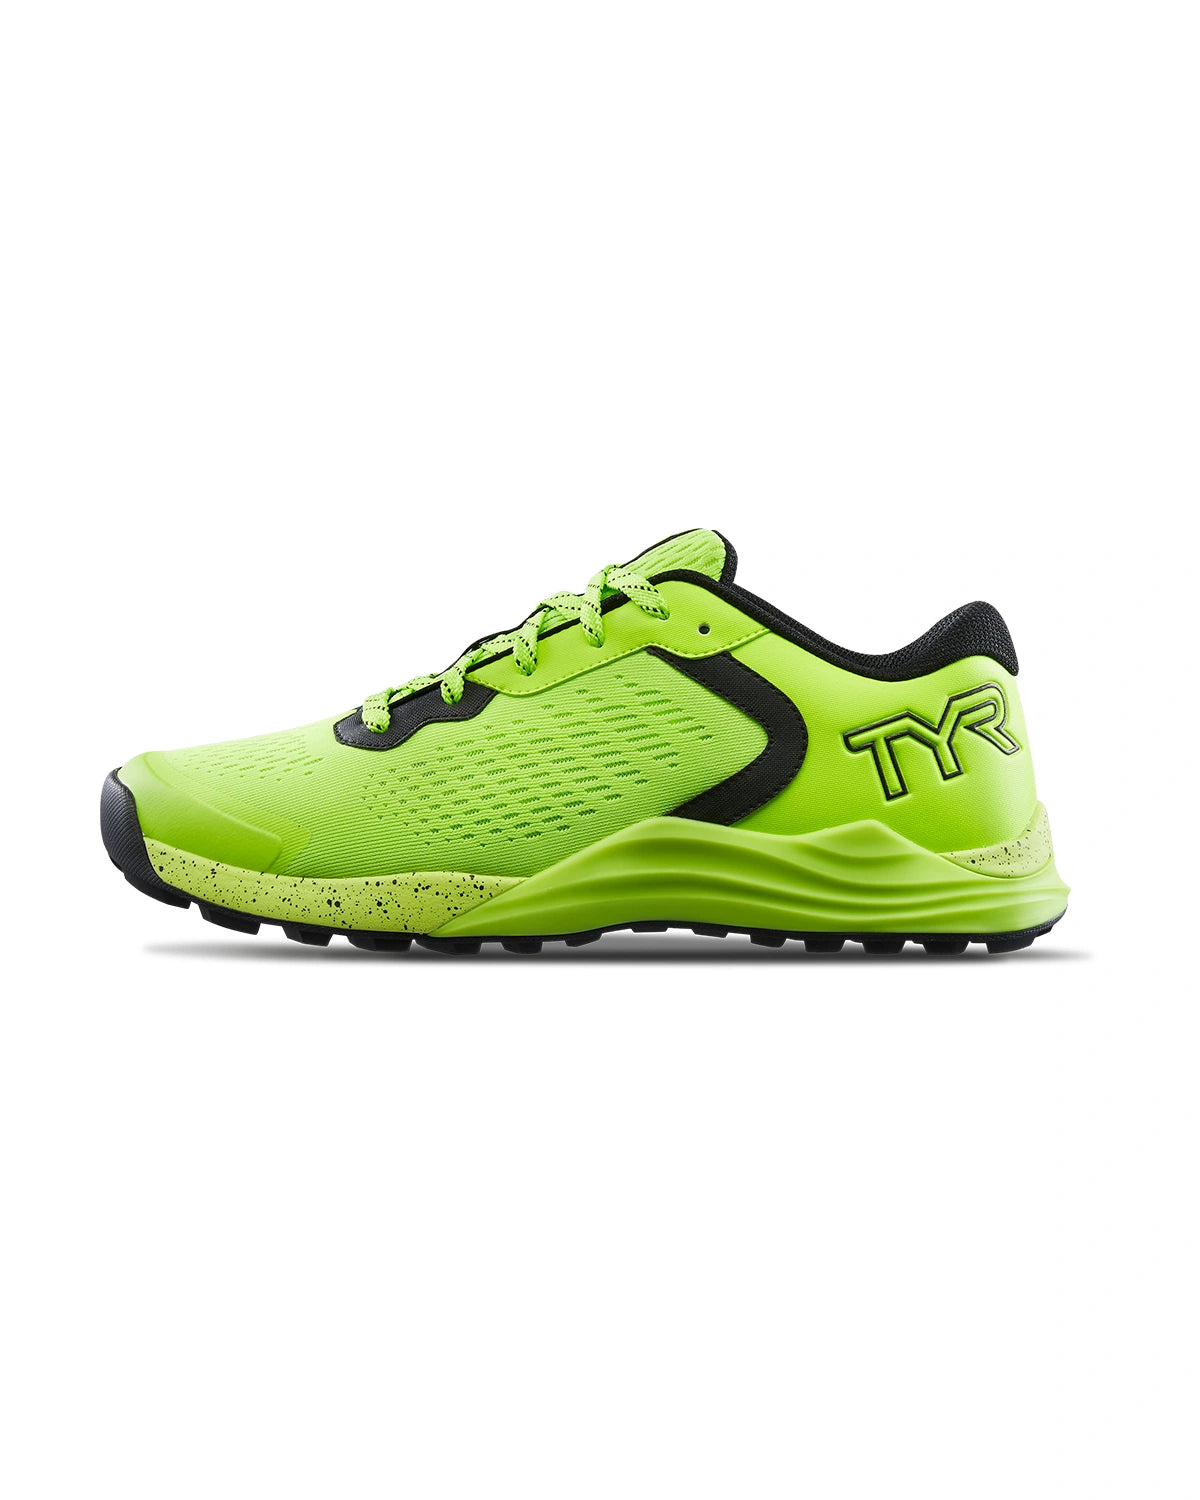 TYR CXT-1 Turf Trainer Limited Edition Attak Yellow